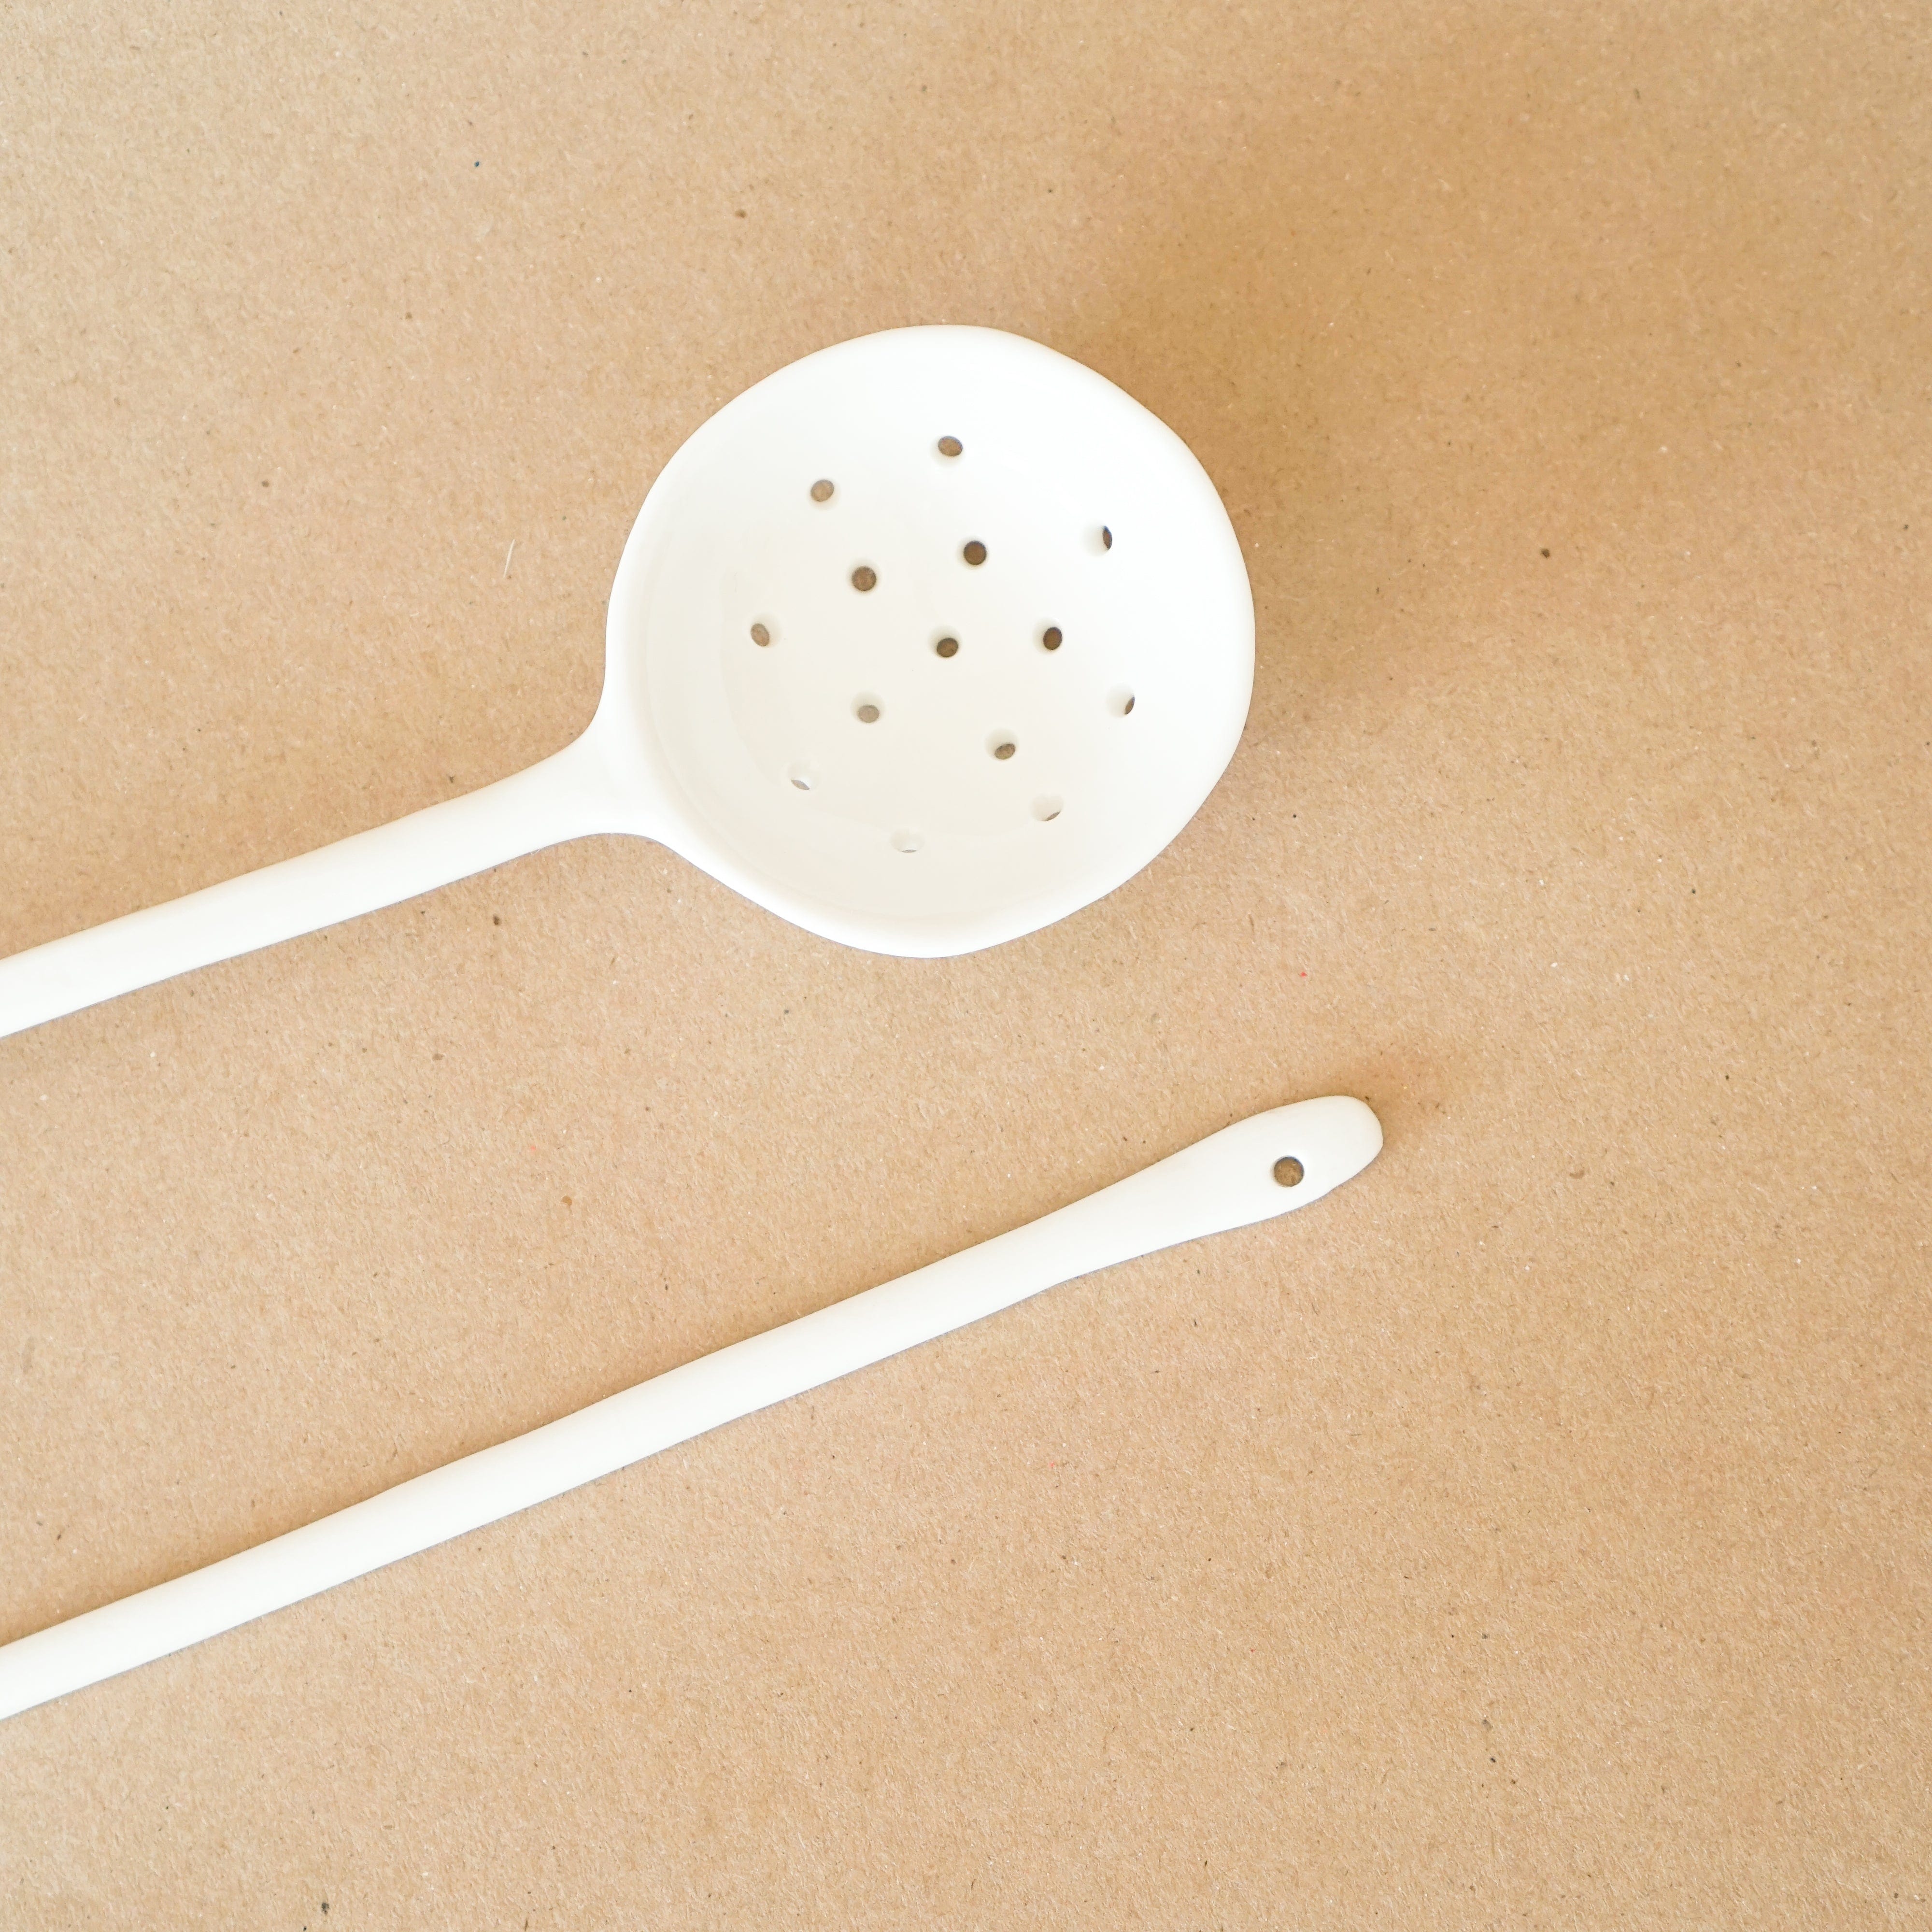 Serax Slotted Spoons Porcelain Strainer Spoon